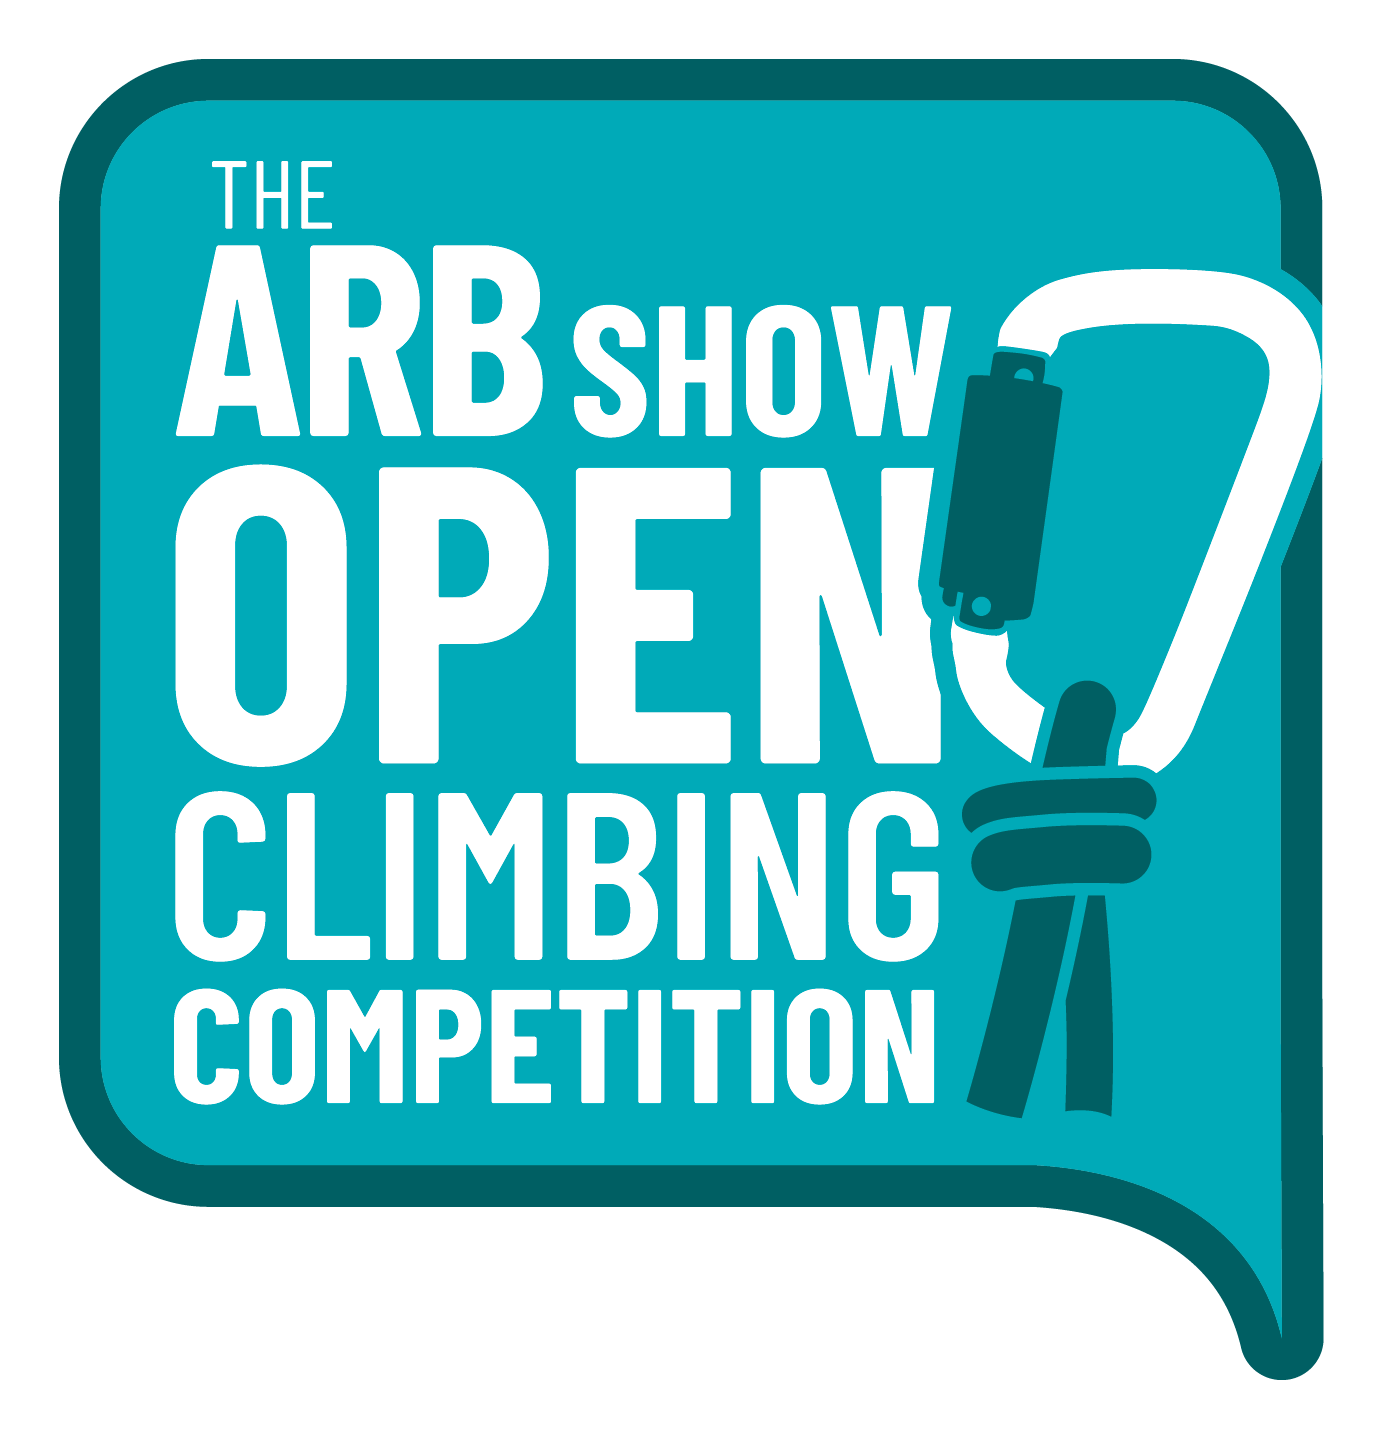 The ARB Show Open Climbing Competition